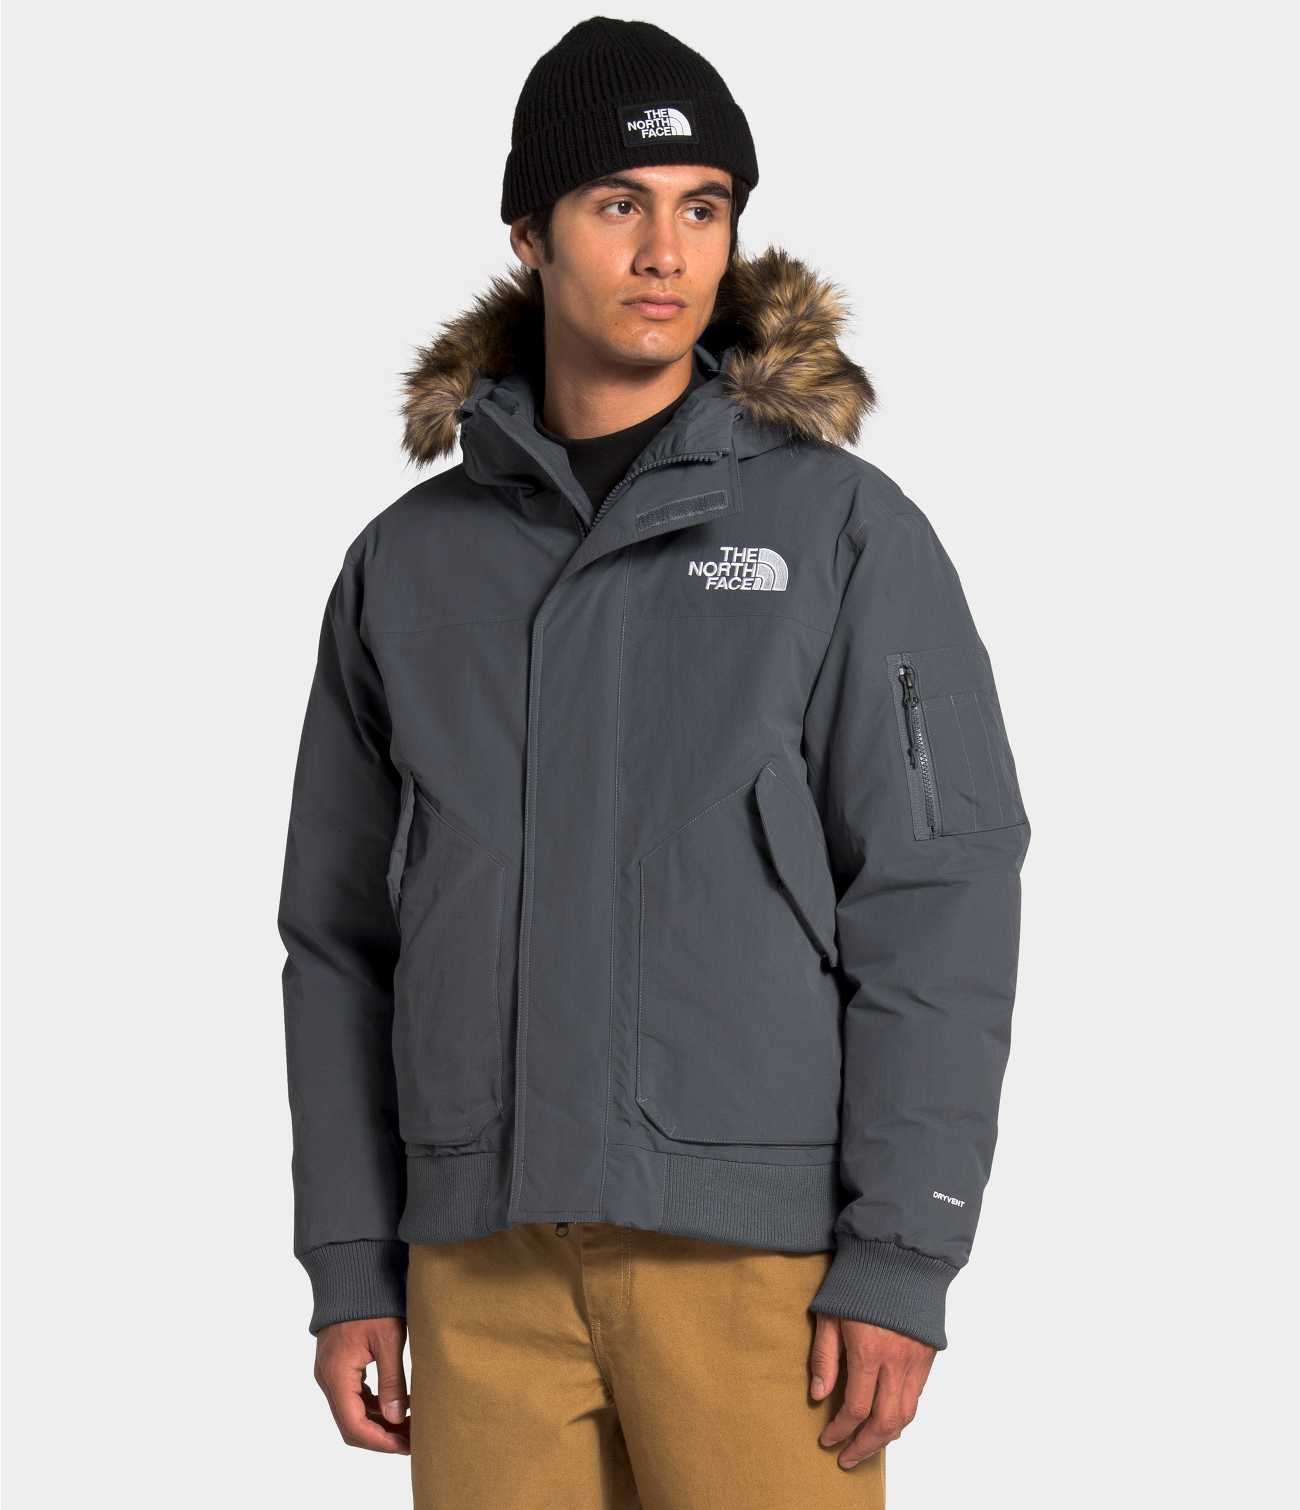 The North Face RENEWED by RÆBURN